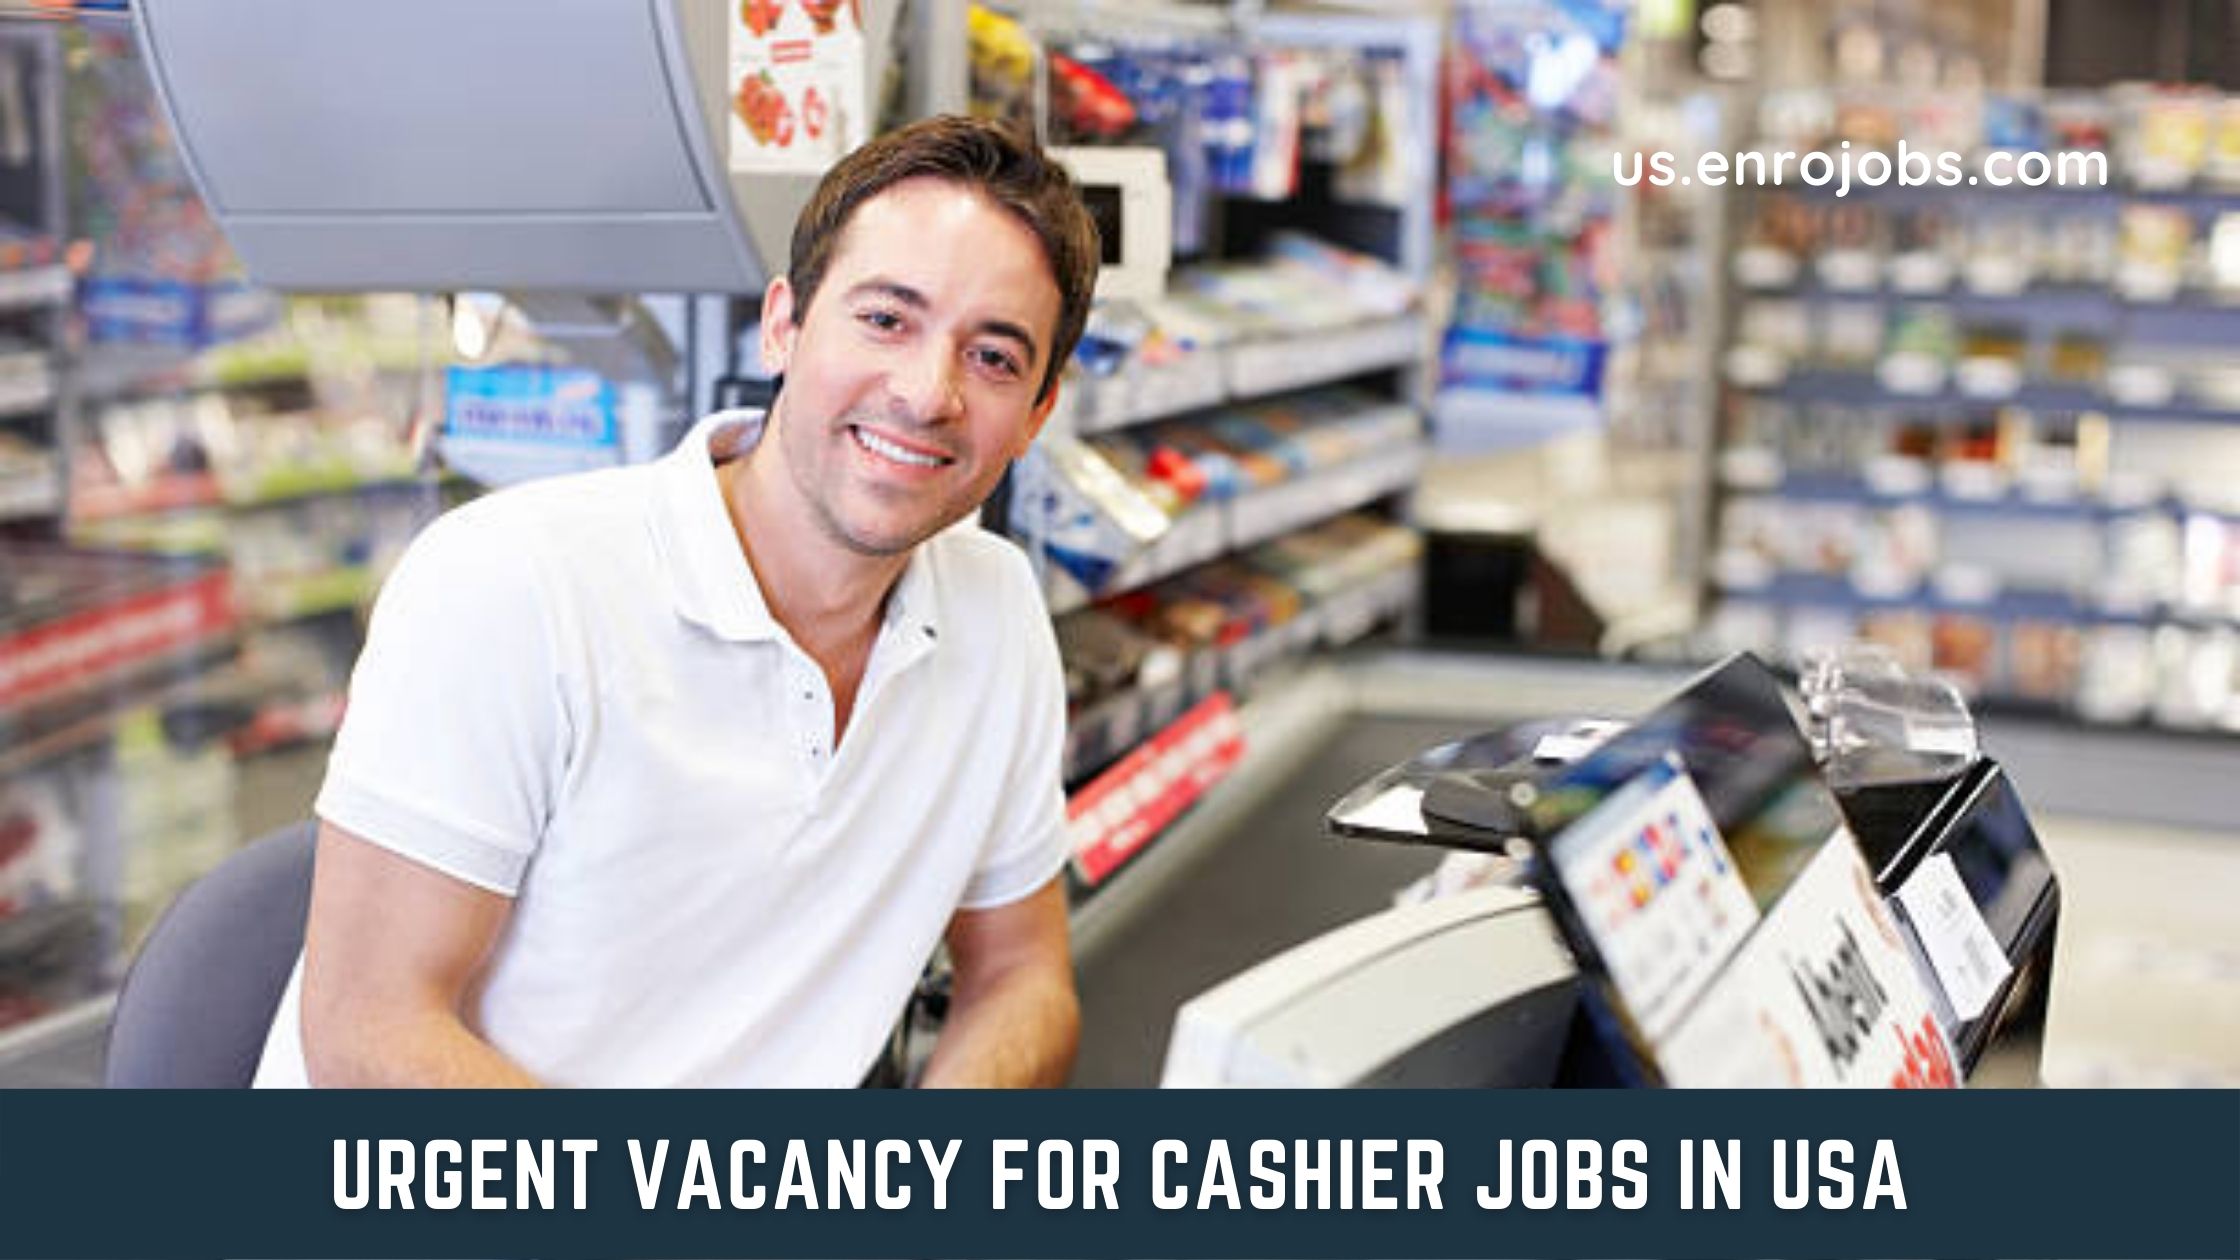 Urgent Vacancy For Cashier Jobs in USA